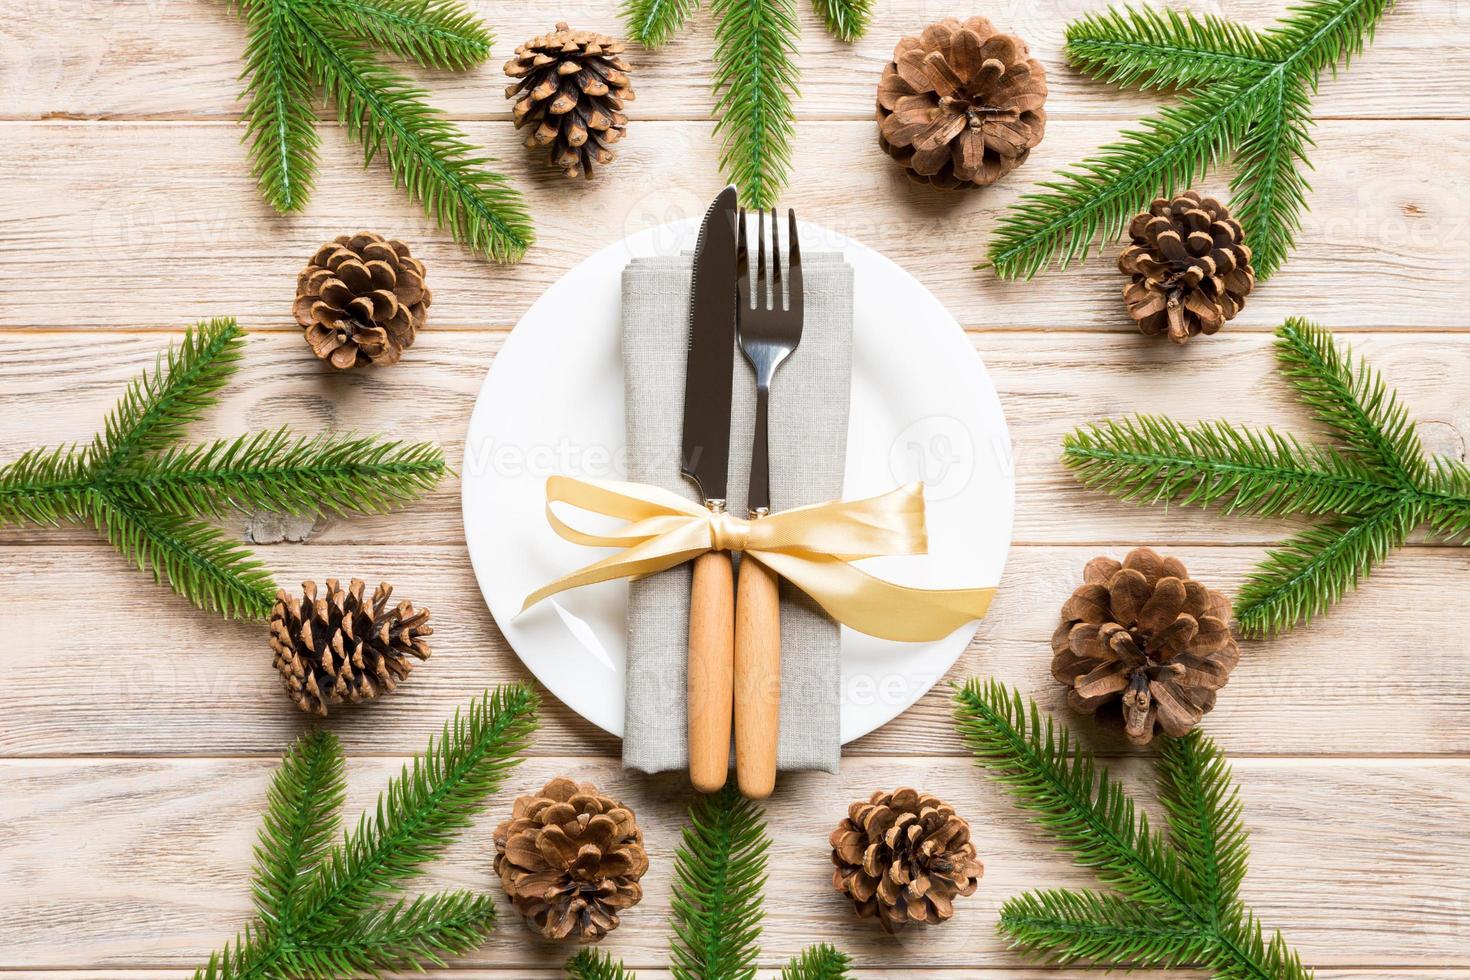 New Year set of plate and utensil on wooden background. Top view of holiday dinner decorated with pine cones. Christmas time concept photo